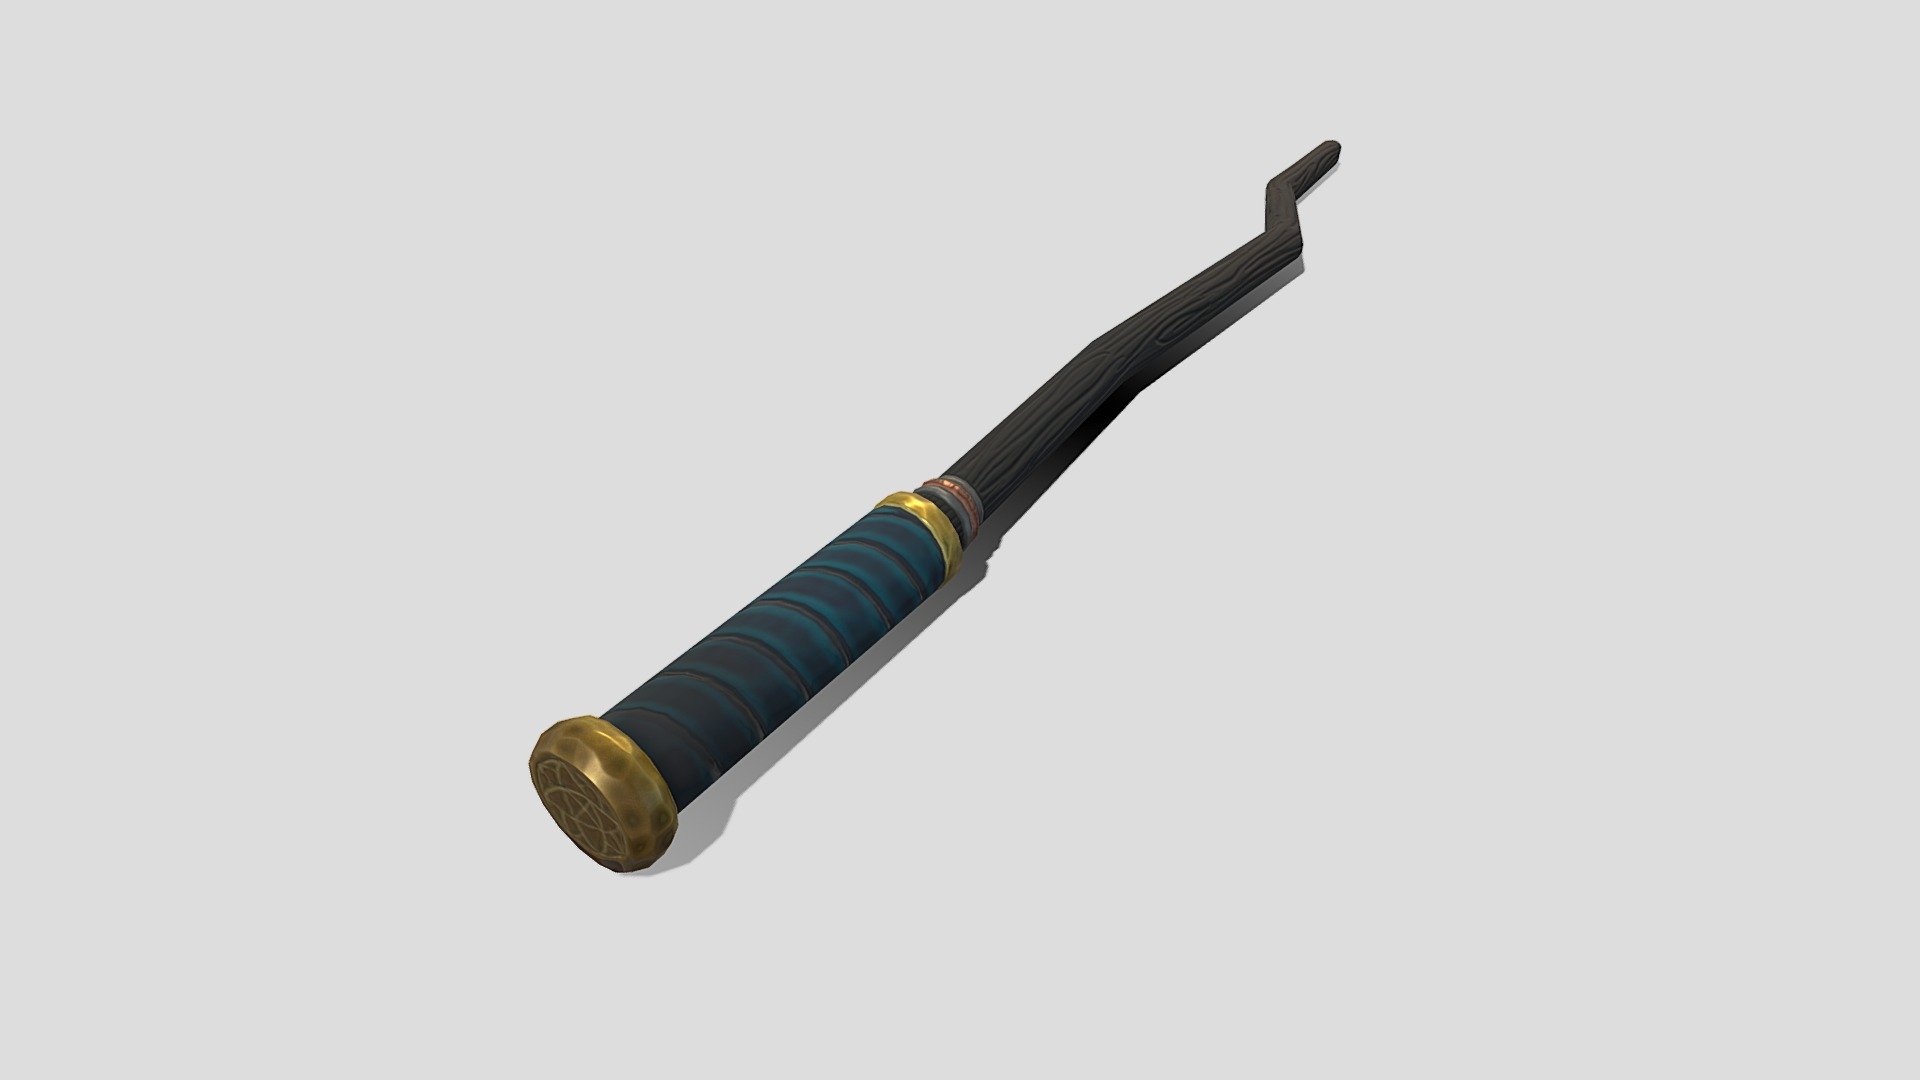 If you need additional work done do not hesitate to contact me, I am available for freelance work.

A magical wand for a witch or wizard.

Highpoly sculpted in Nomadsculpt. Lowpoly made in Blender. 
Highpoly and Lowpoly-model in Blend-file is included in additional file.
Model and Concept by Me, Enya Gerber 3d model